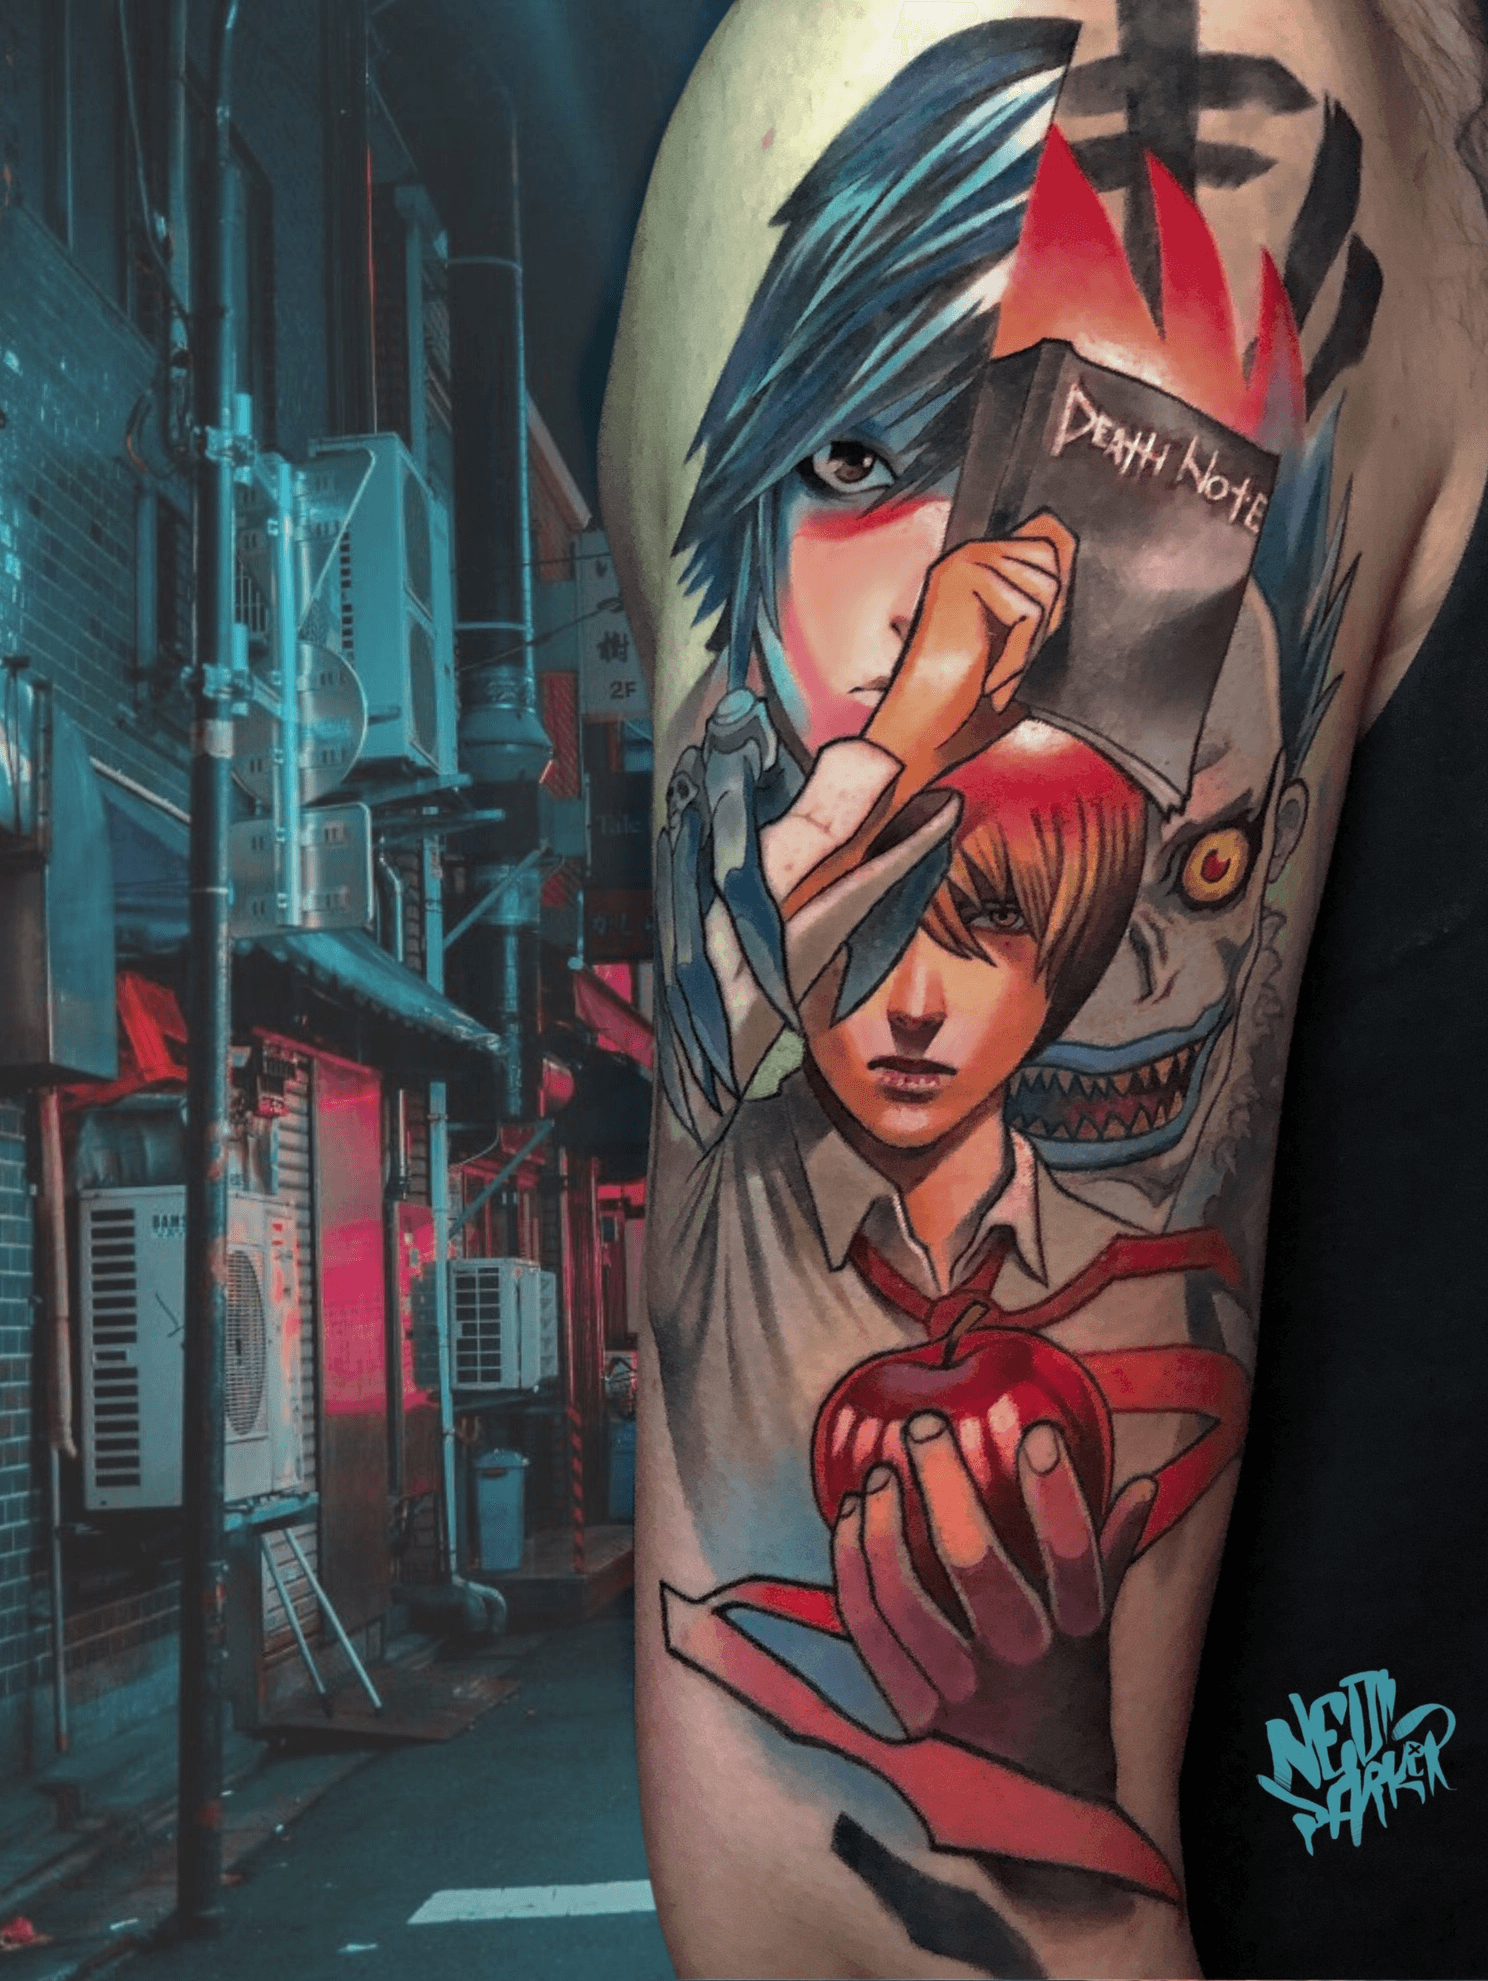 80 Cute Anime Tattoos Ideas for Men and Women 